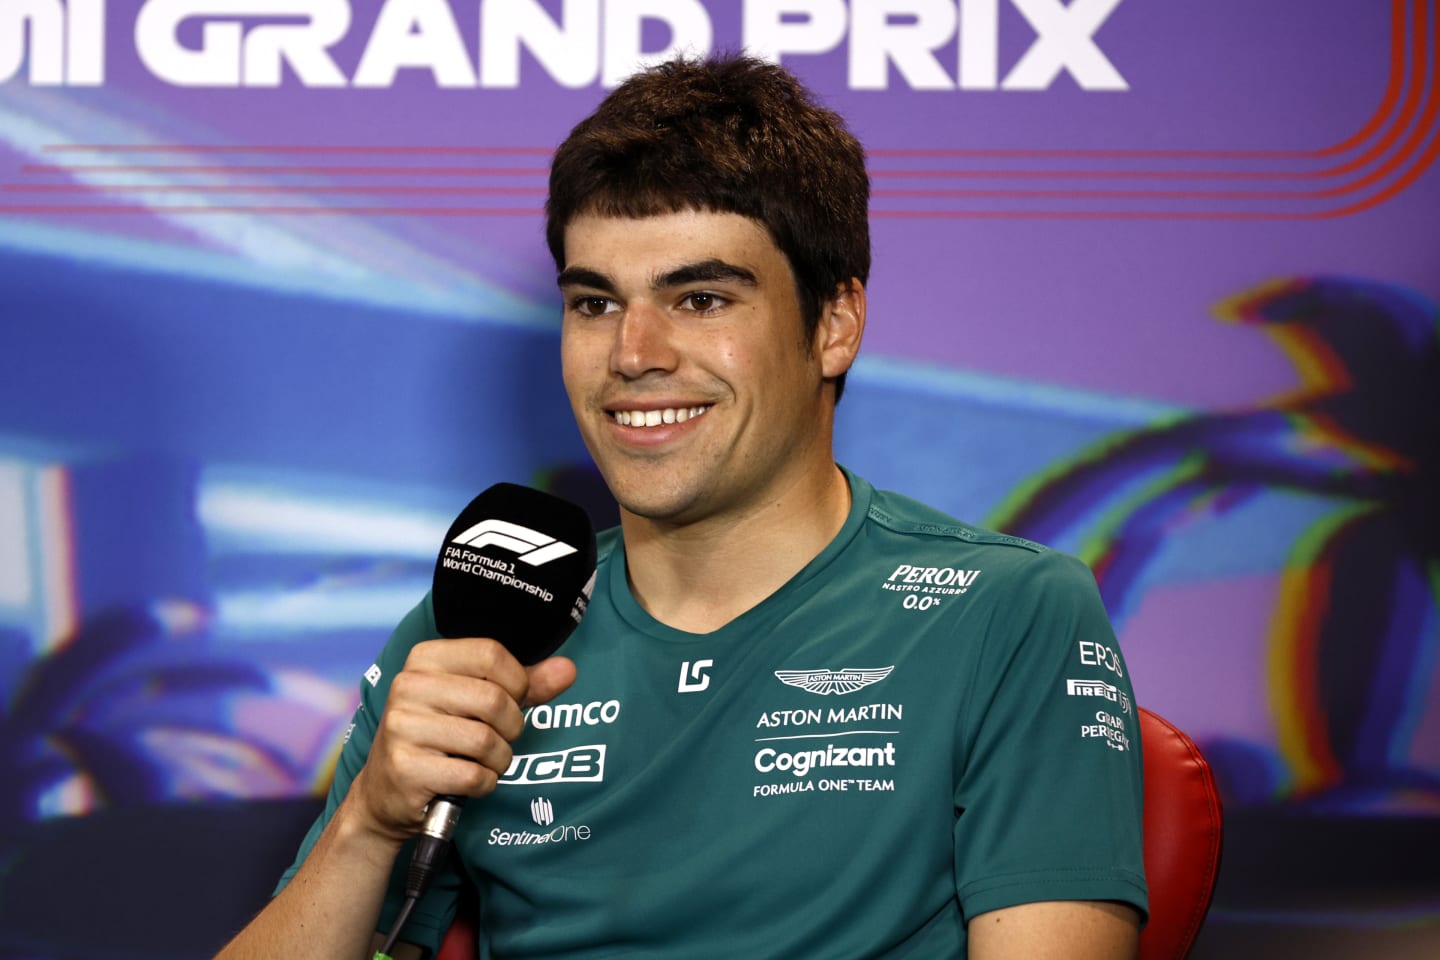 MIAMI, FLORIDA - MAY 06: Lance Stroll of Canada and Aston Martin F1 Team talks in the Drivers Press Conference prior to practice ahead of the F1 Grand Prix of Miami at the Miami International Autodrome on May 06, 2022 in Miami, Florida. (Photo by Jared C. Tilton/Getty Images)